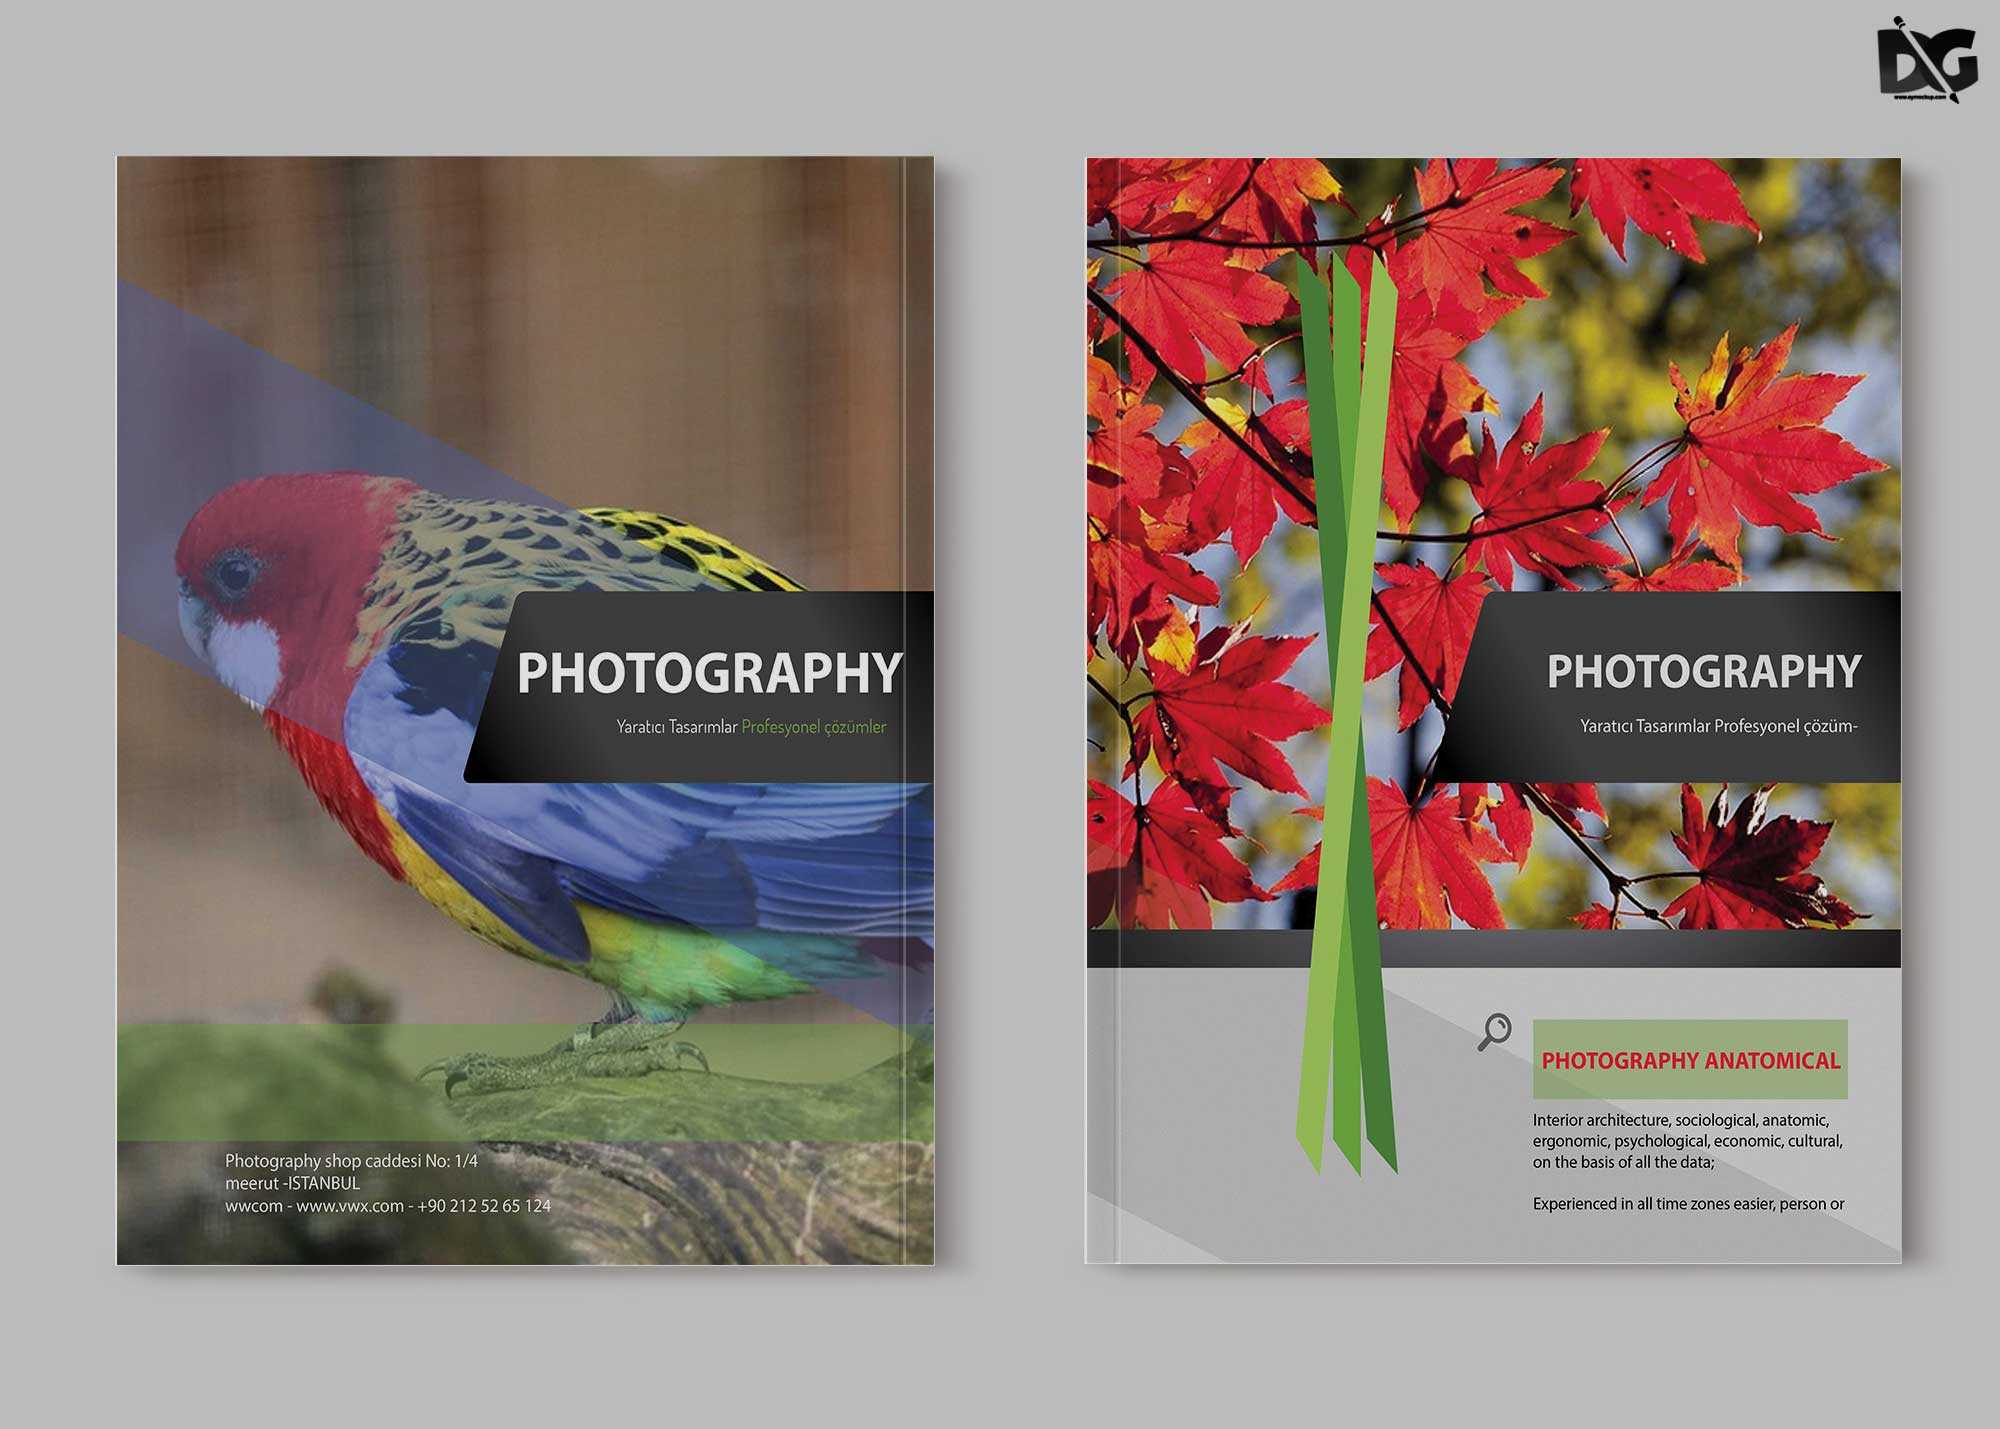 Free Zoo Photography Psd Brochure Template | Free Psd Mockup Within Zoo Brochure Template